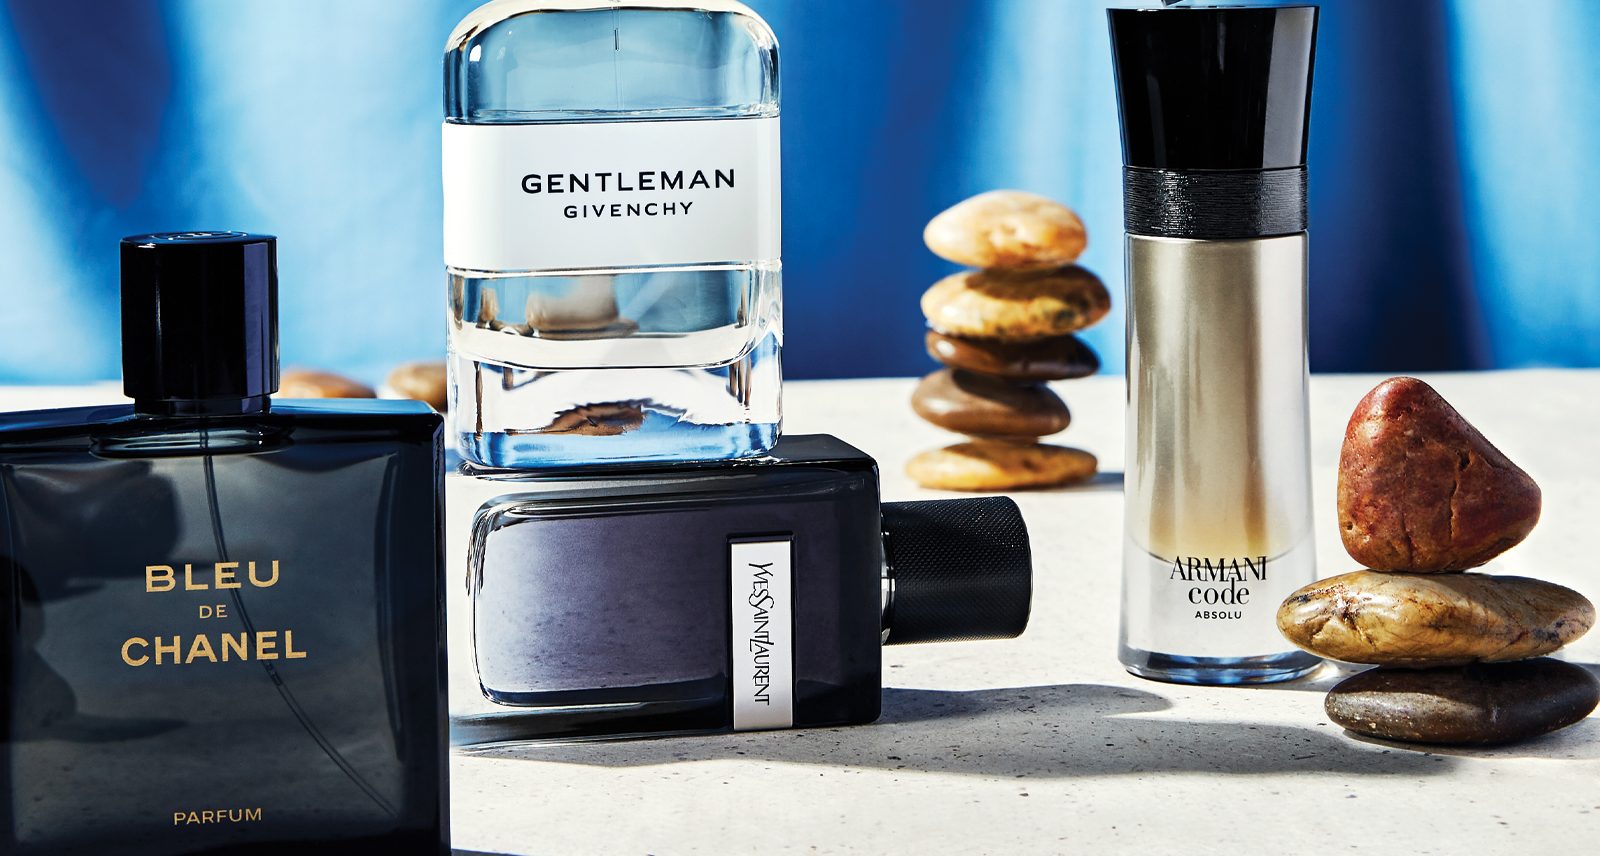 5 Dark, Musky Fragrances That'll Heat Up Your Summer